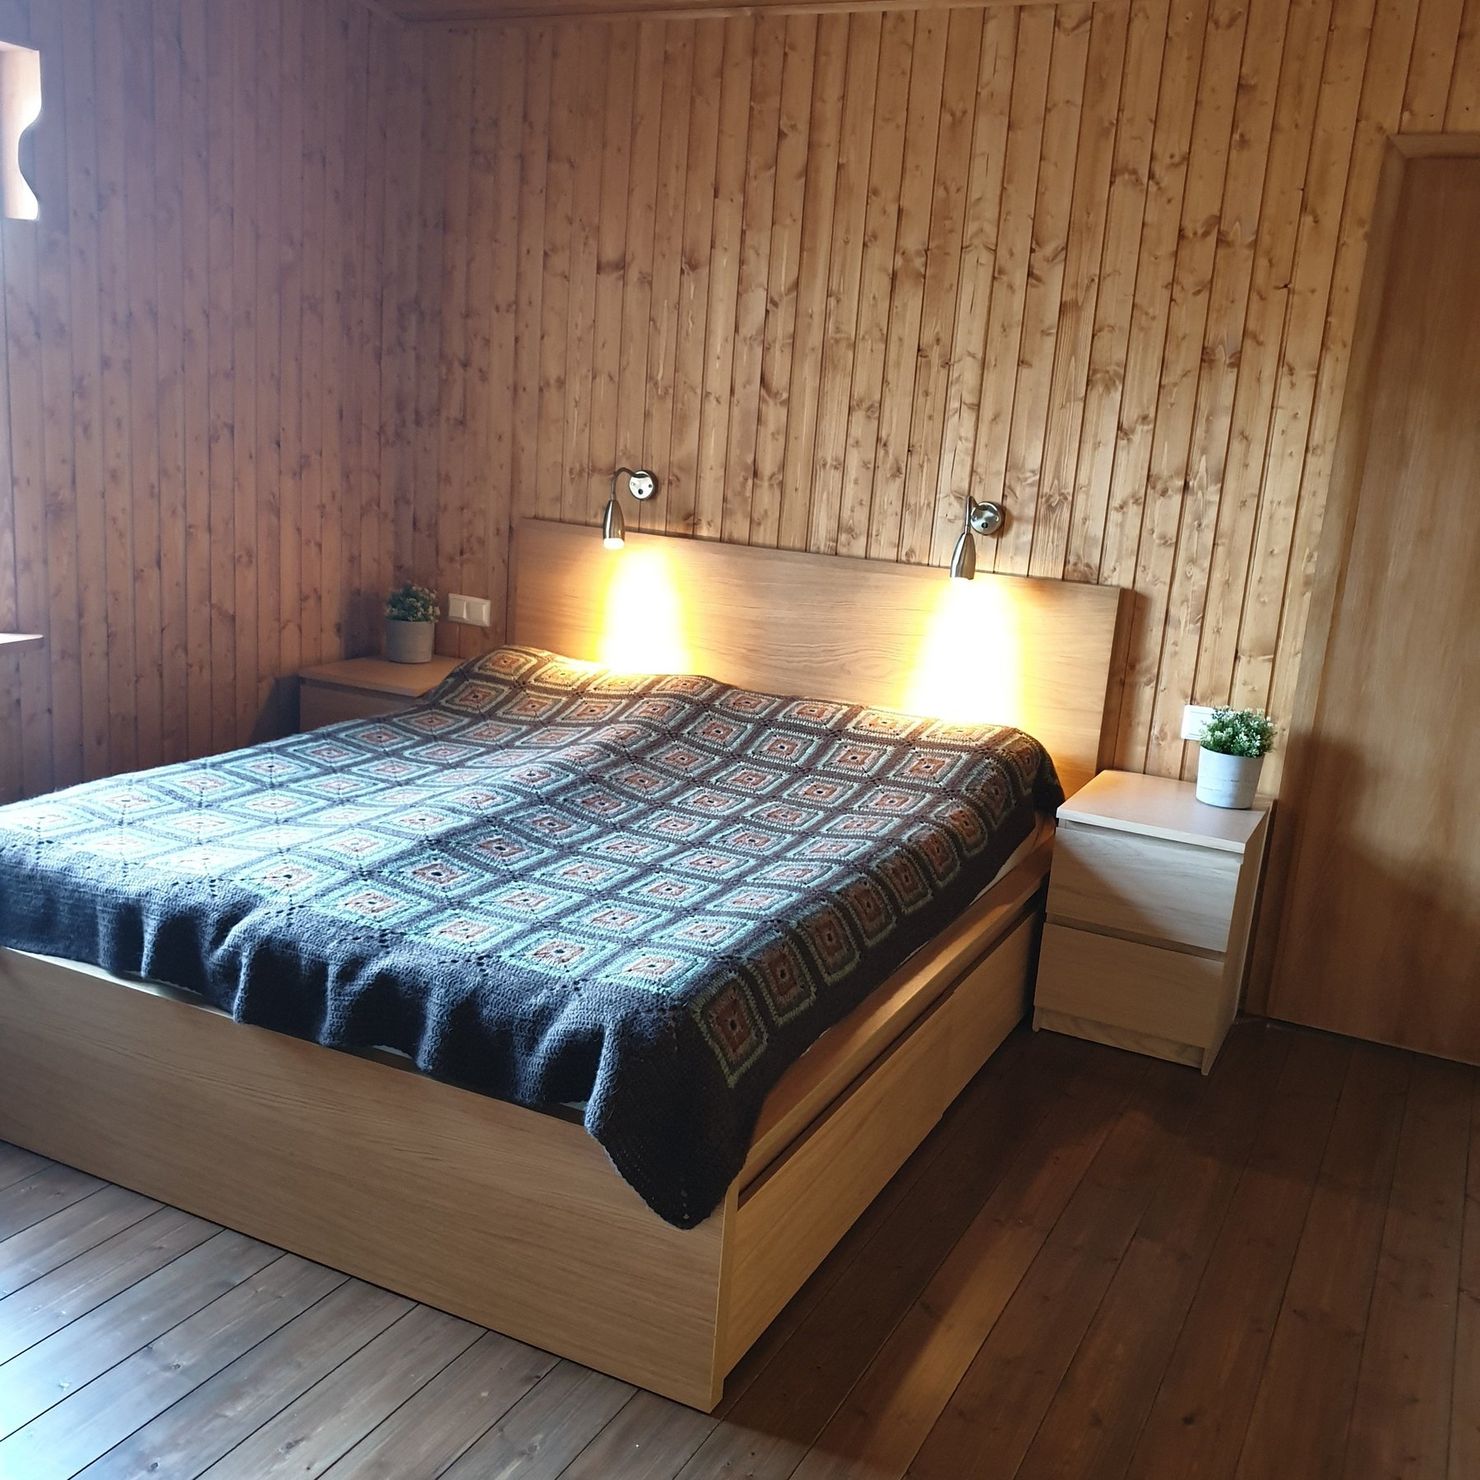 Wood paneled bedroom with large double bed